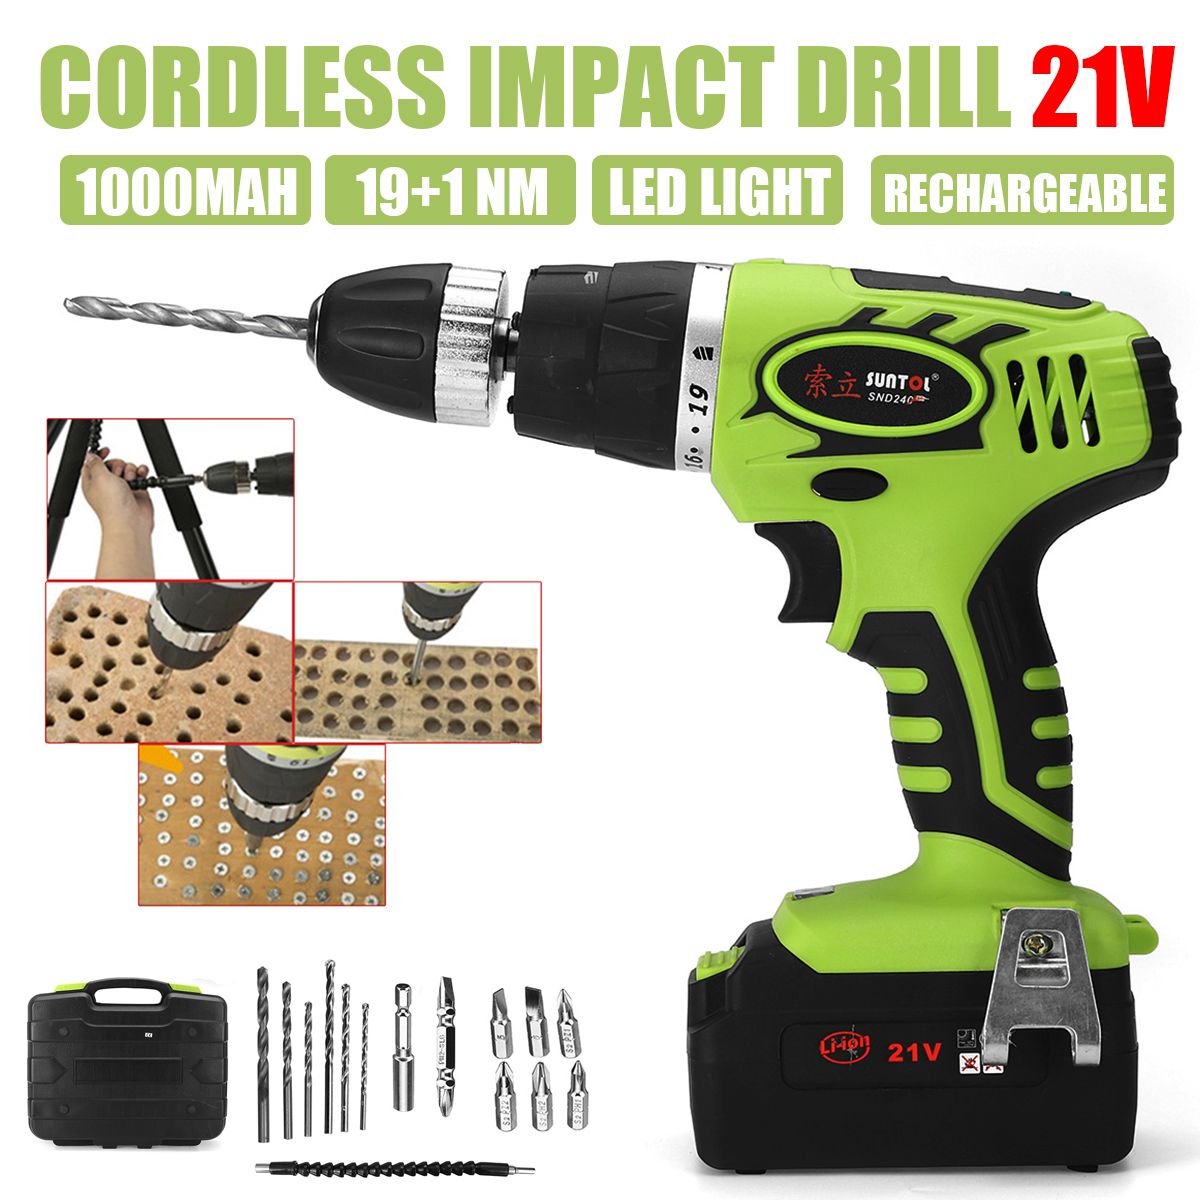 LCD-Electricity-Display-Cordless-Electric-Screwdriver-1000mAh-Li-ion-Battery-Multifunction-Lithium-P-1433165